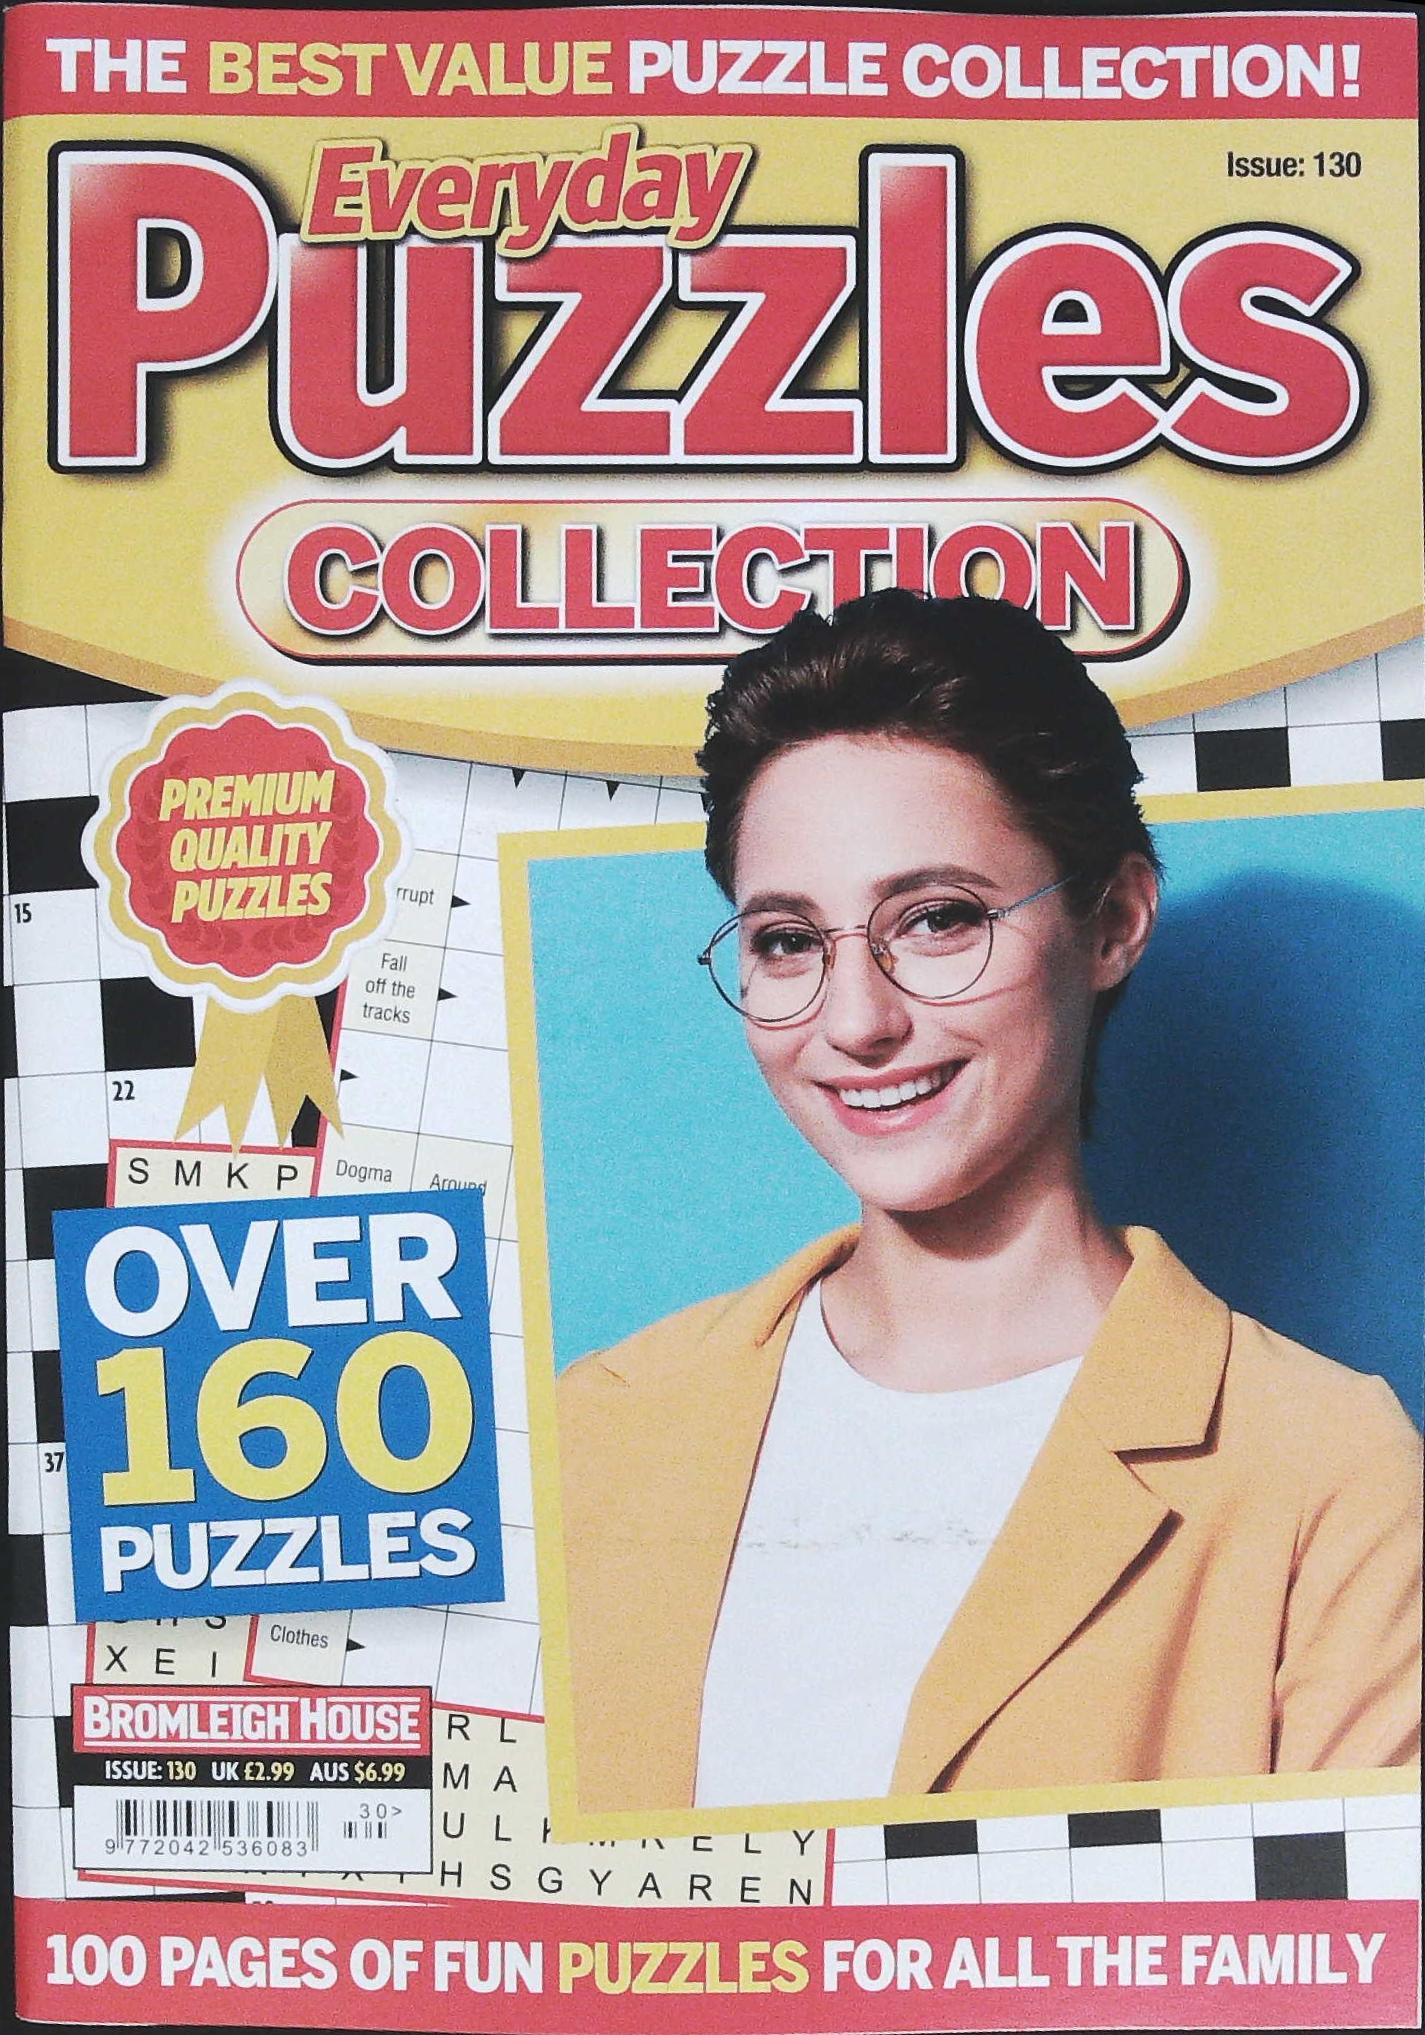 EVERYDAY PUZZLES COLLECTION